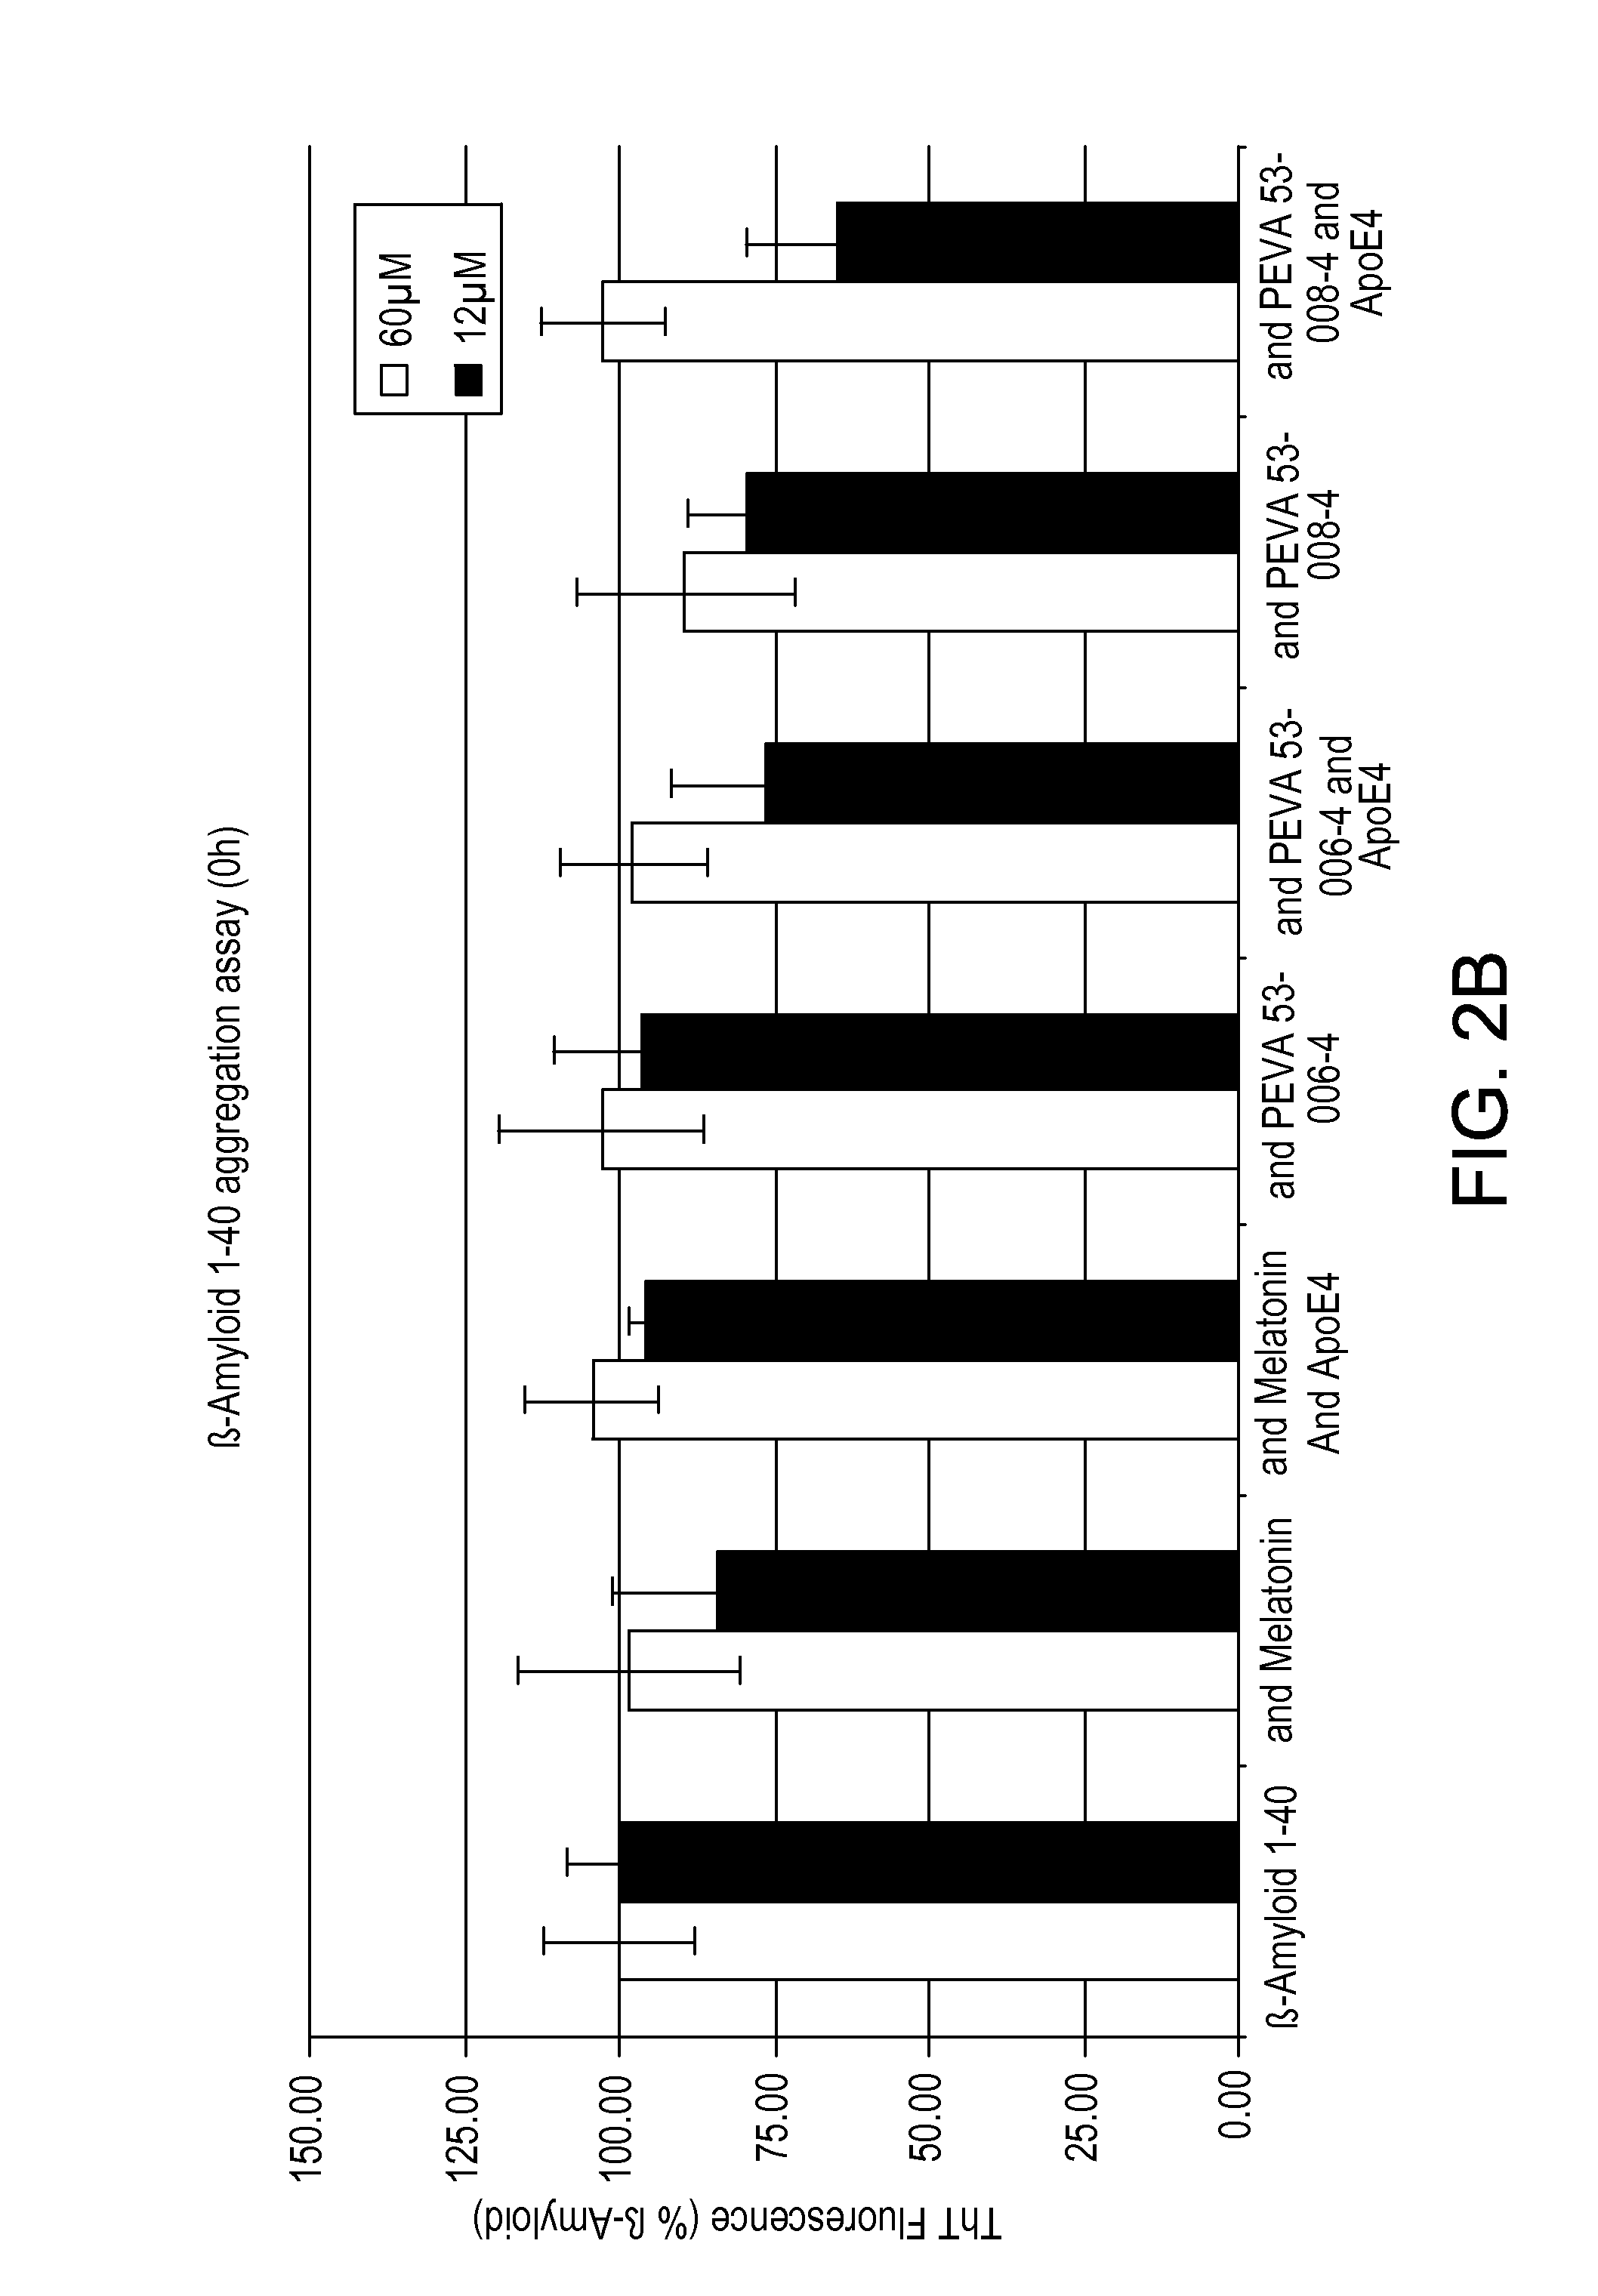 Compositions and methods for treatment of proteinopathies